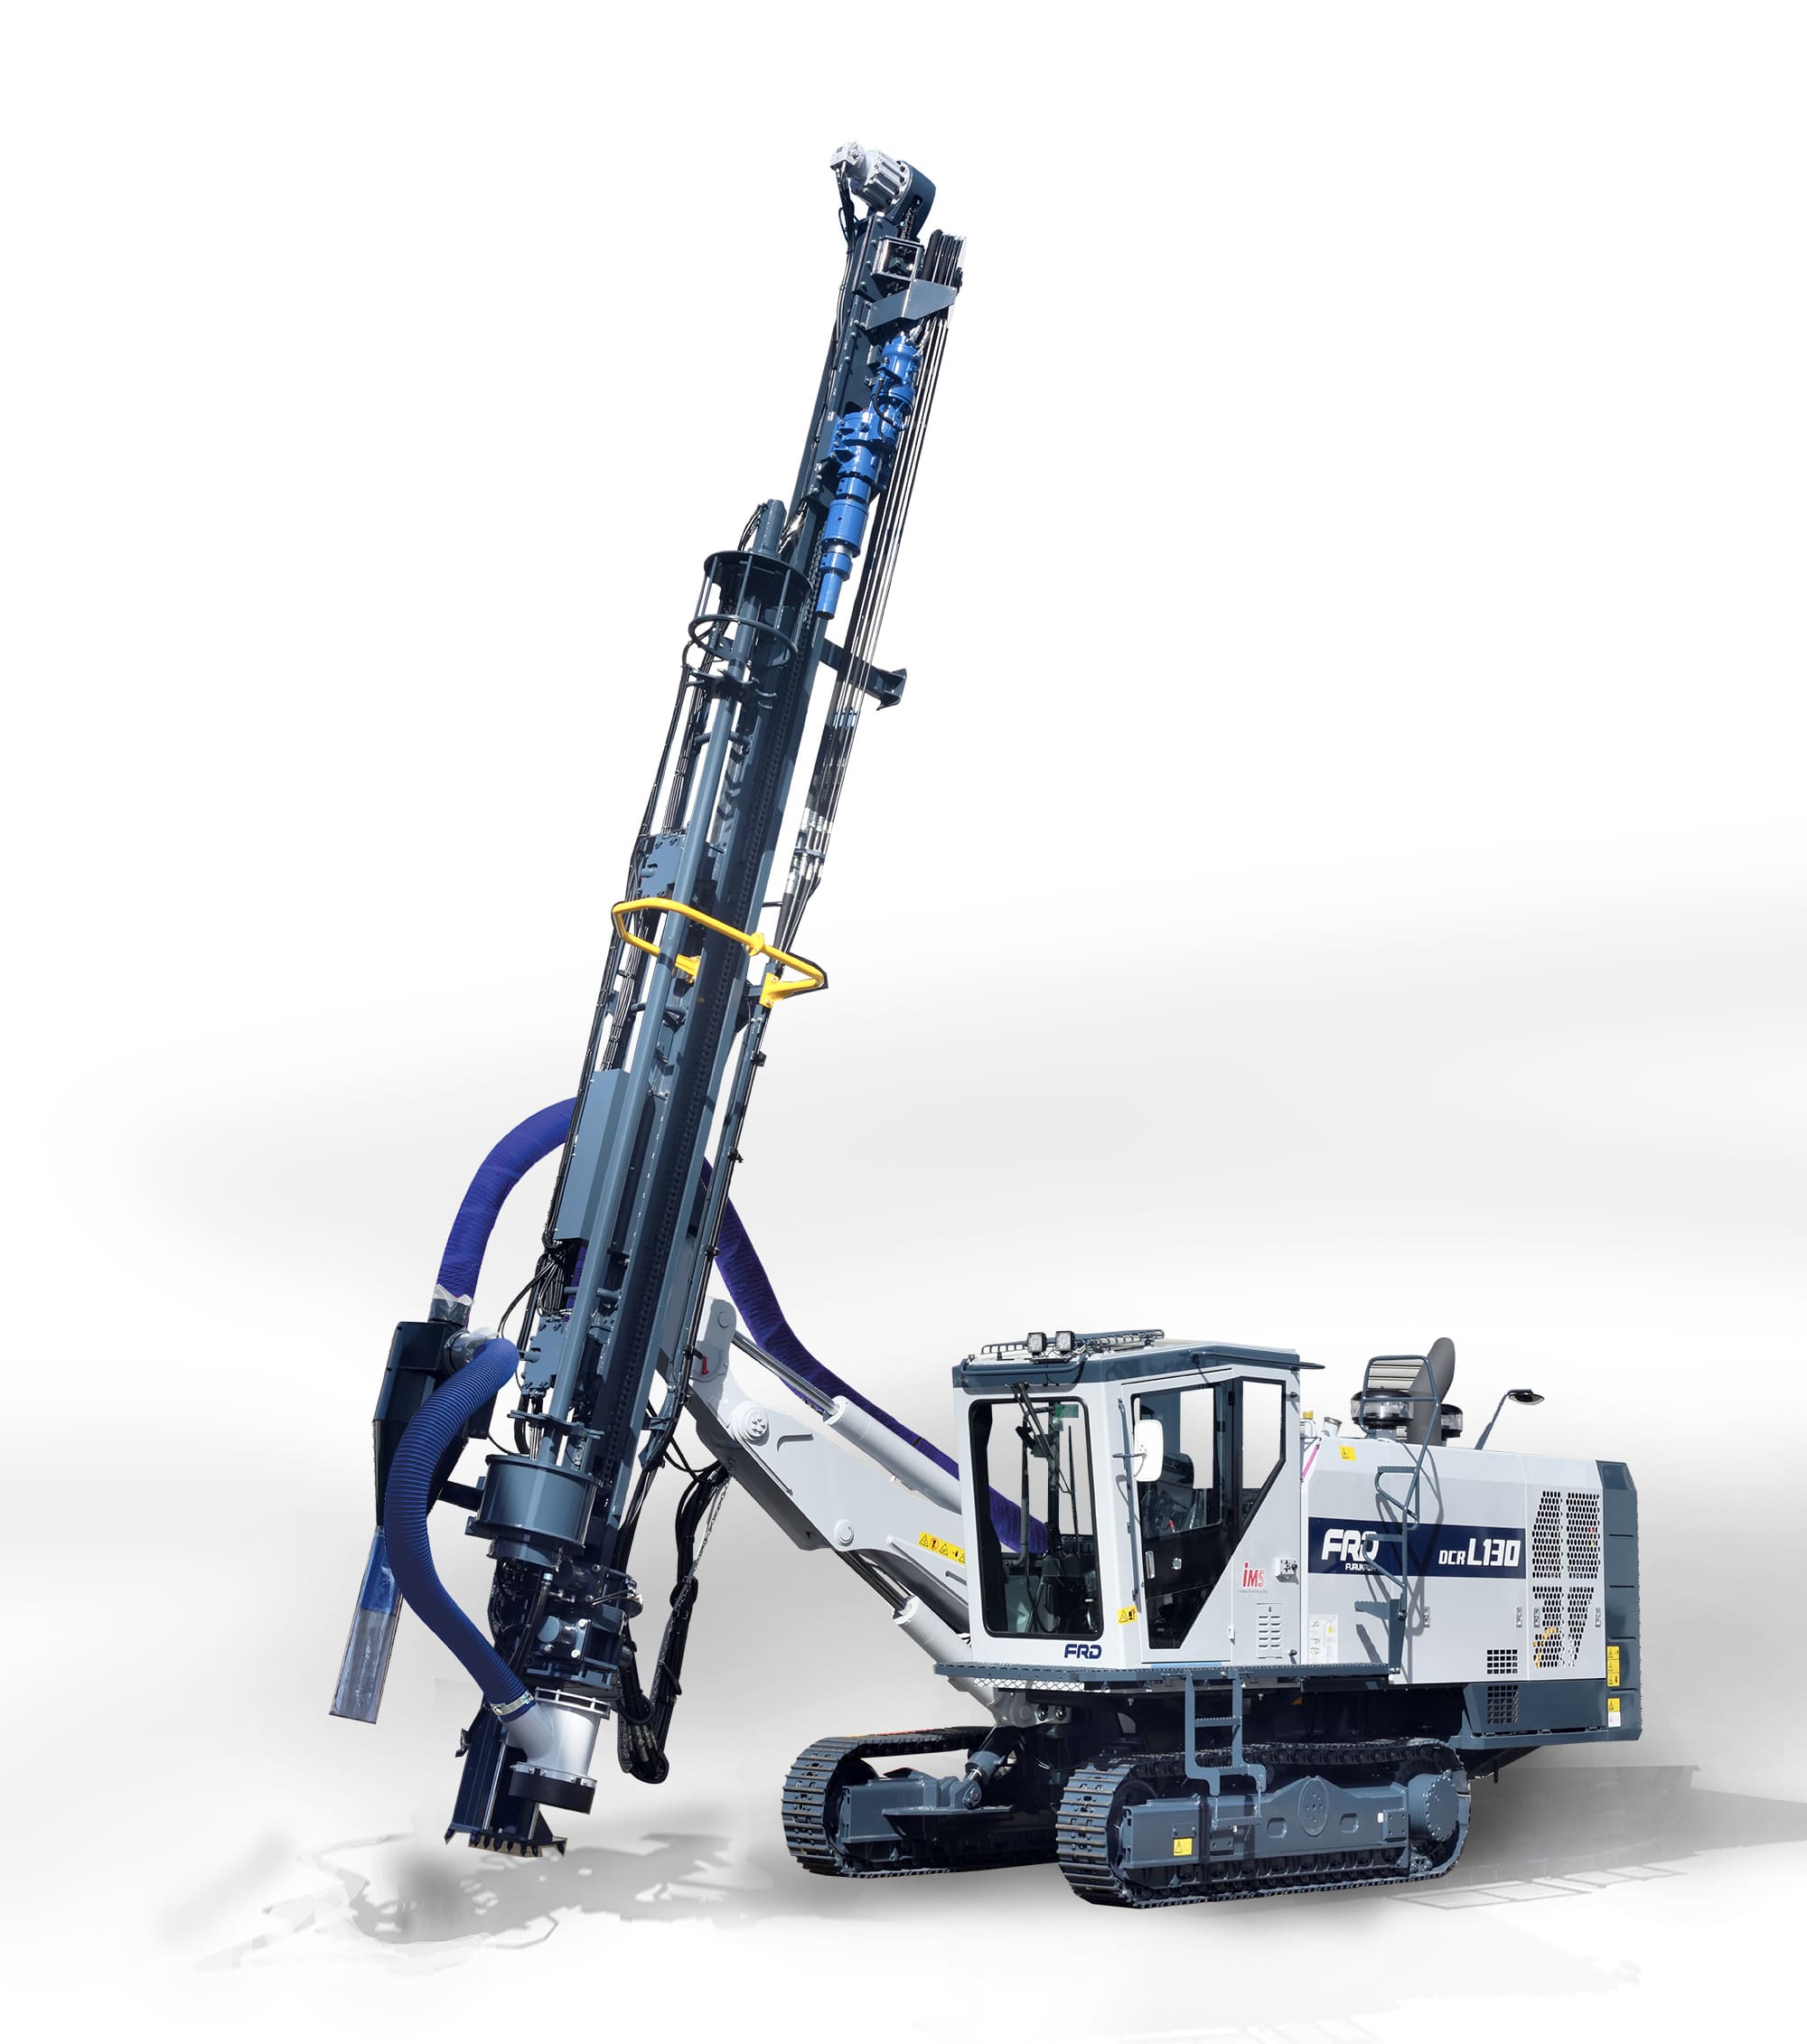 A “down the hole” (DTH) drill is f drilling equipment used in mining, construction, and exploration activities. It is specifically designed for drilling large-diameter holes in hard rock formations.